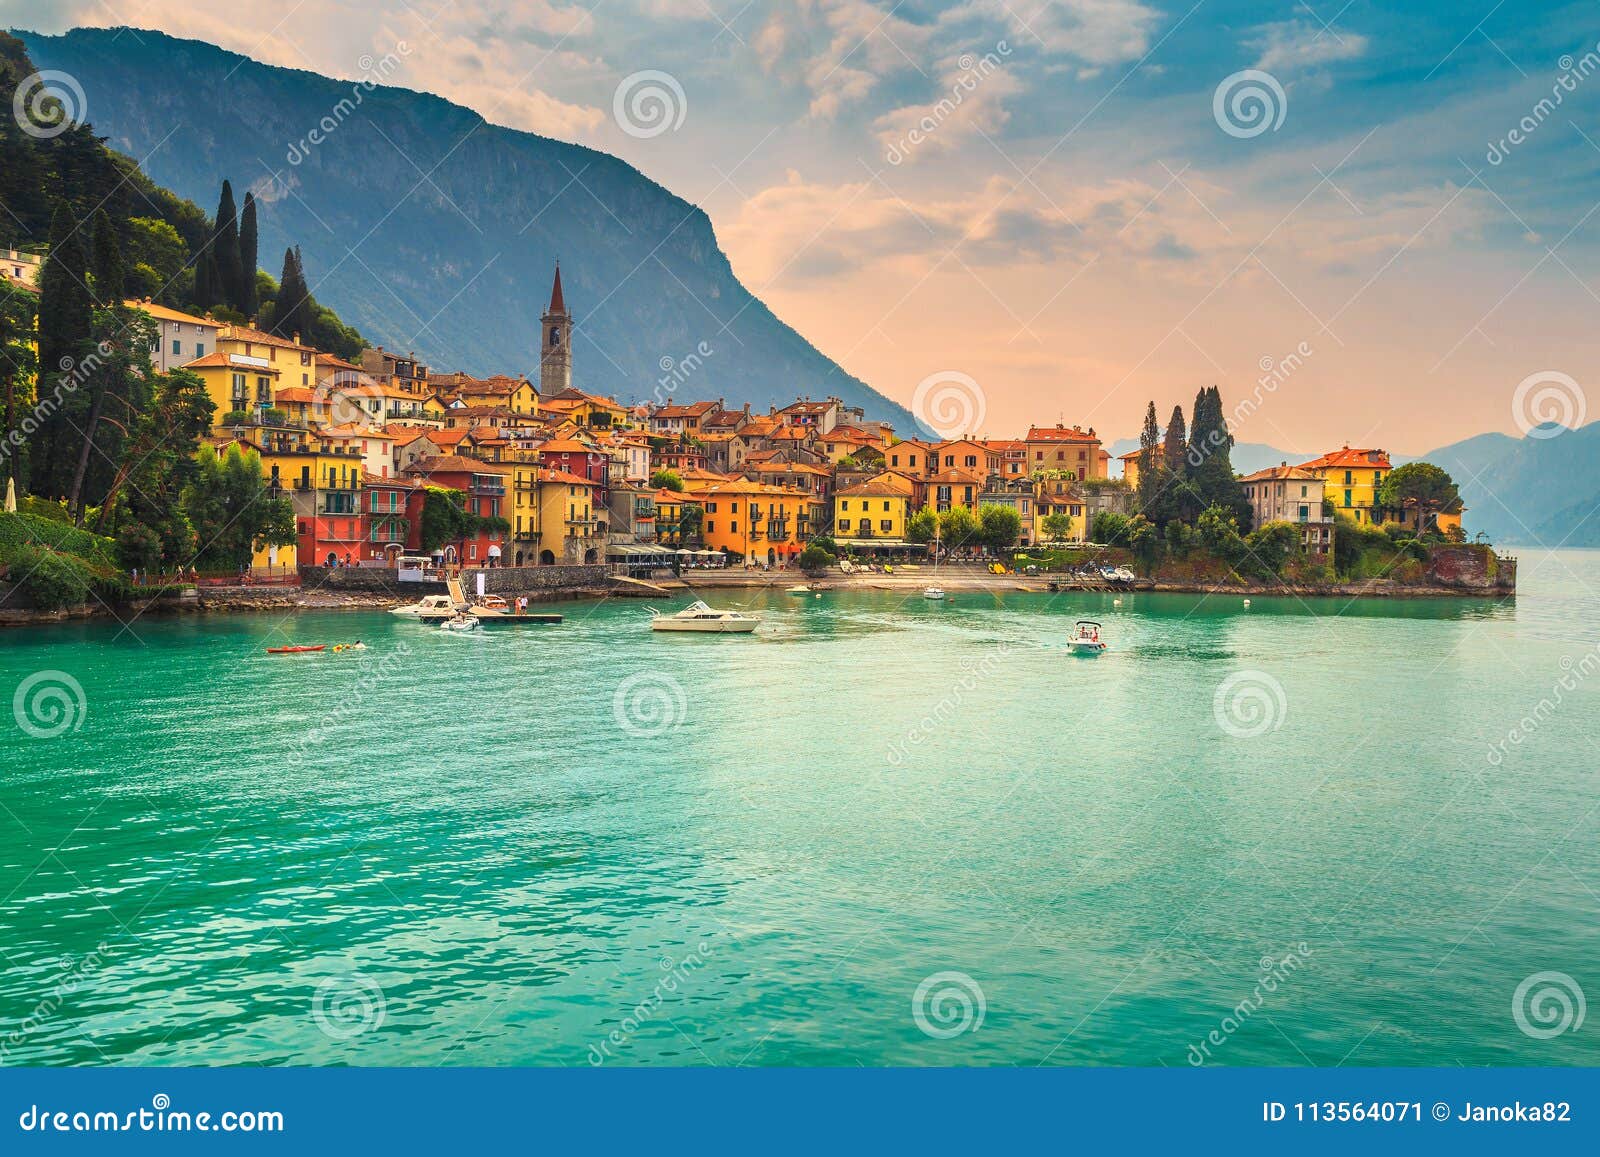 beautiful cityscape with colorful houses, varenna, lake como, italy, europe